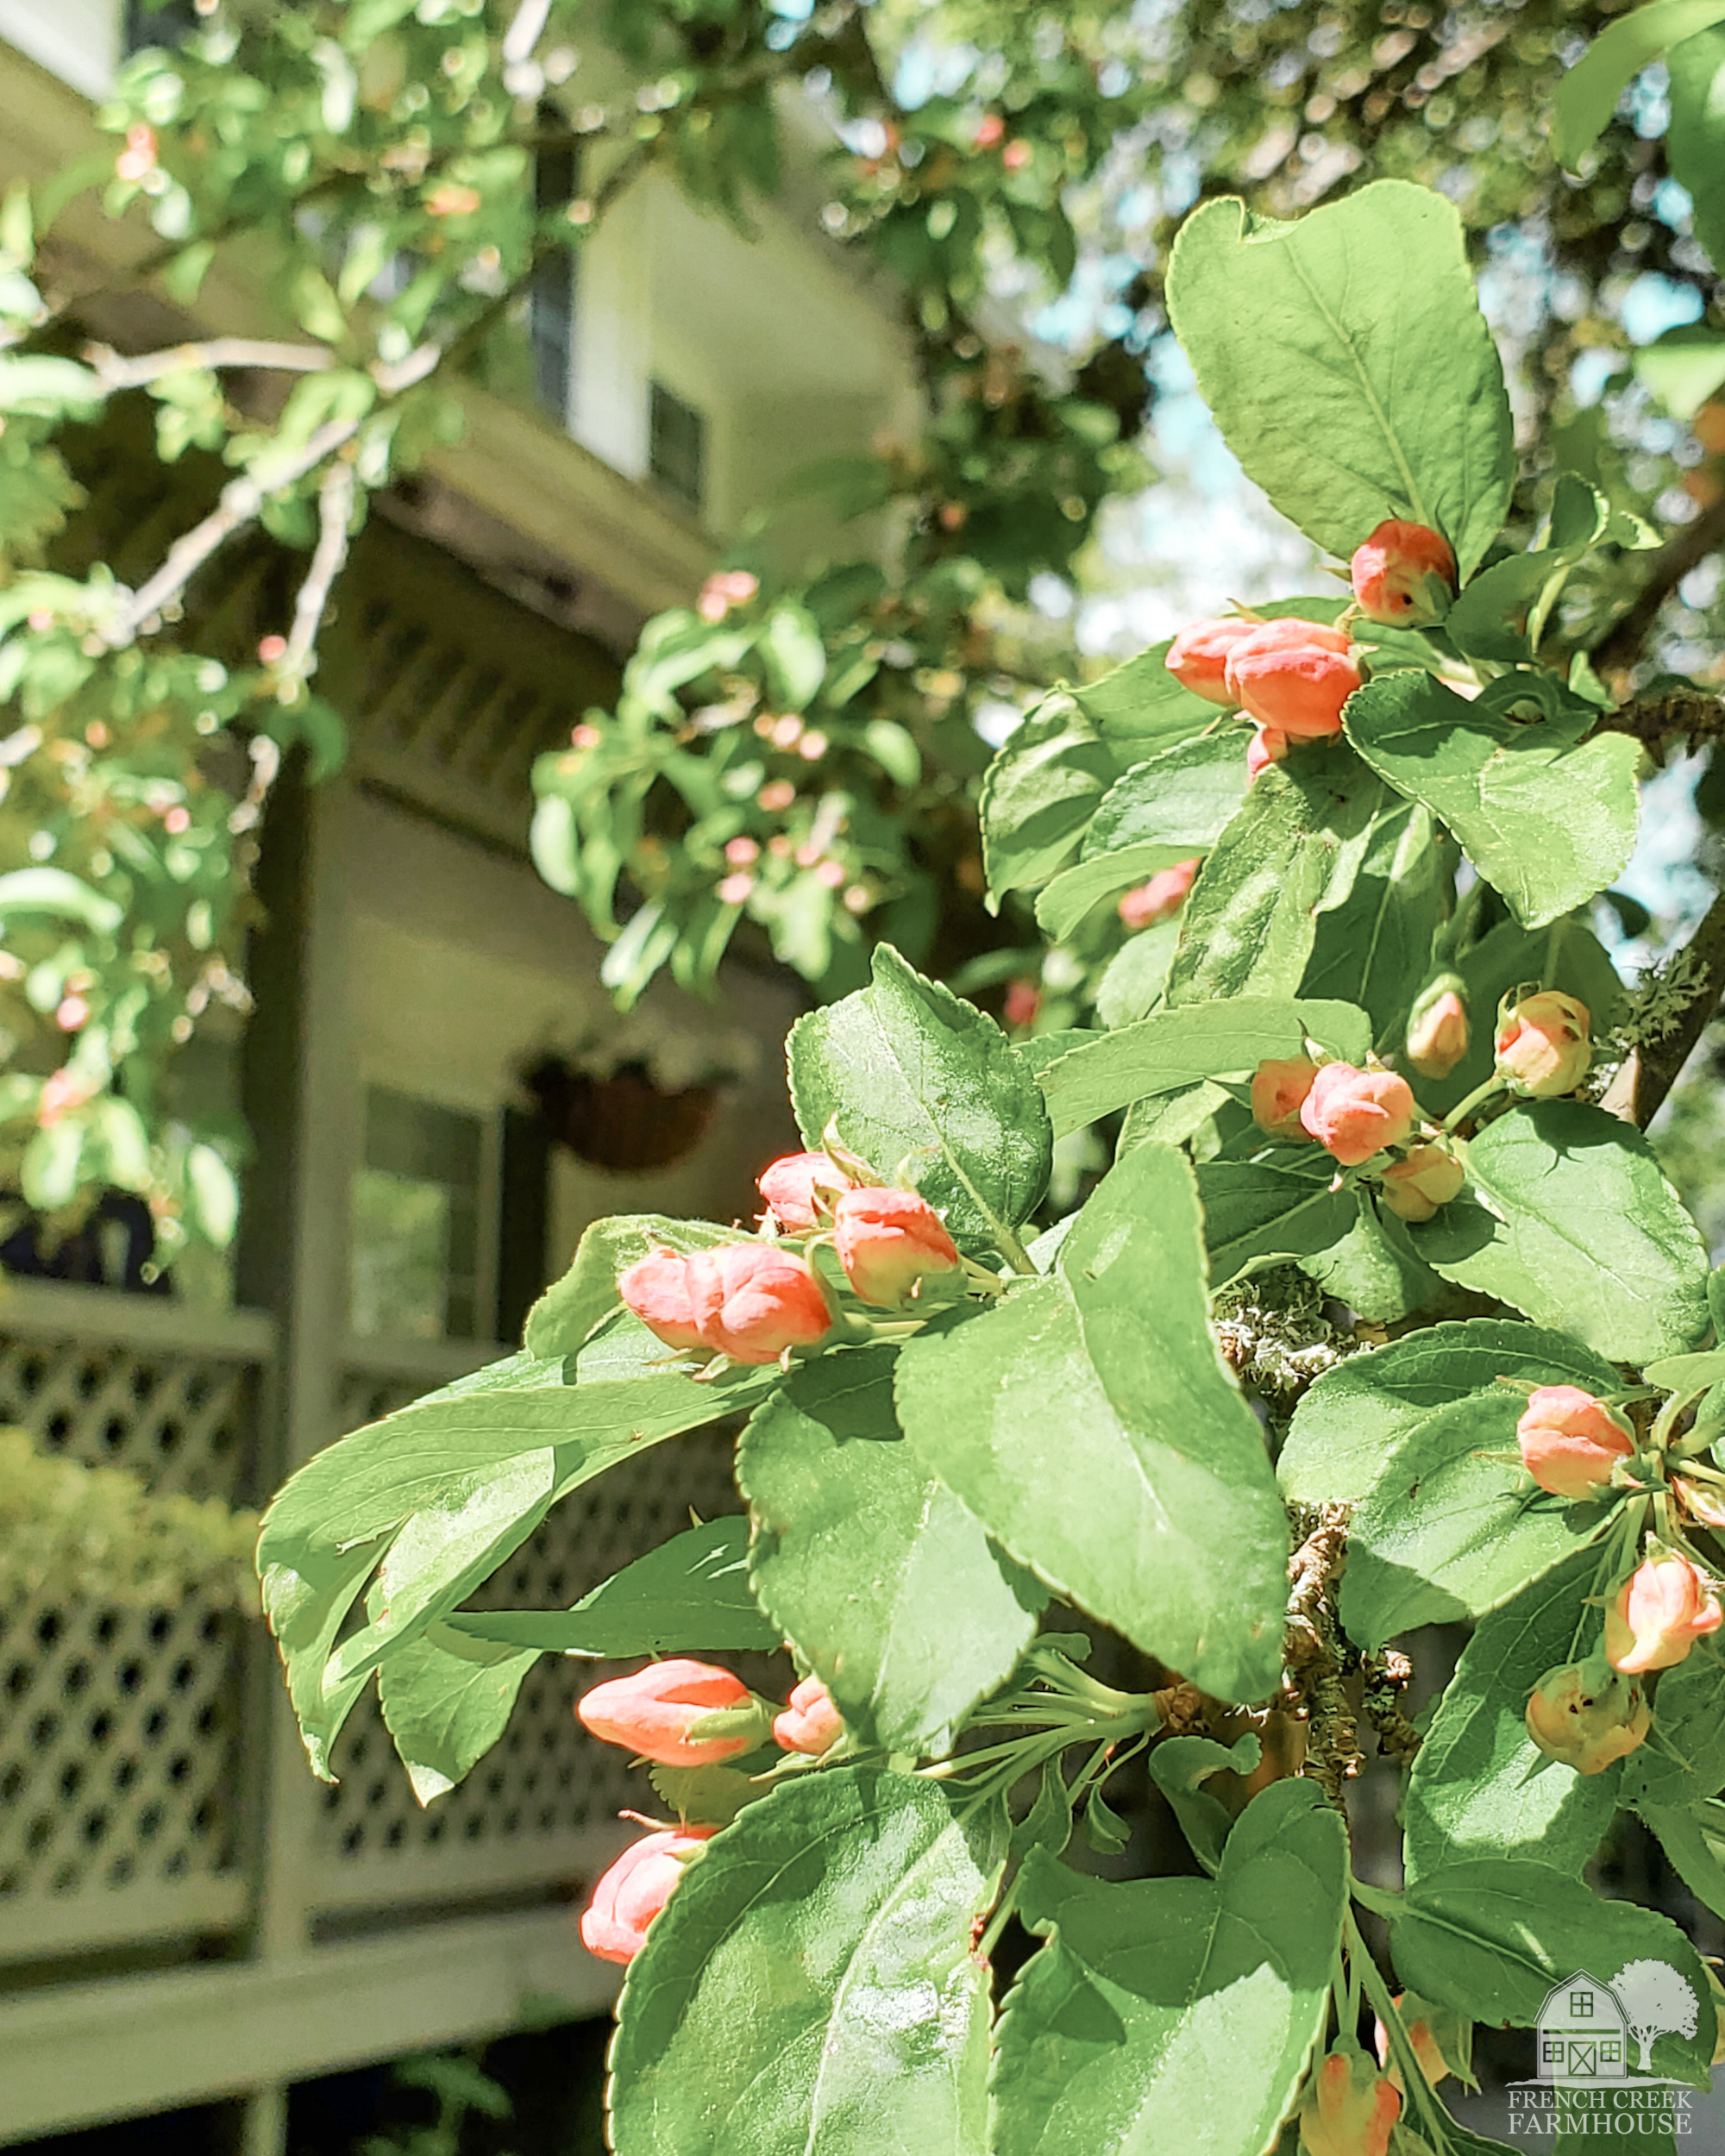 Crabapple buds are about to explode with colorful blooms